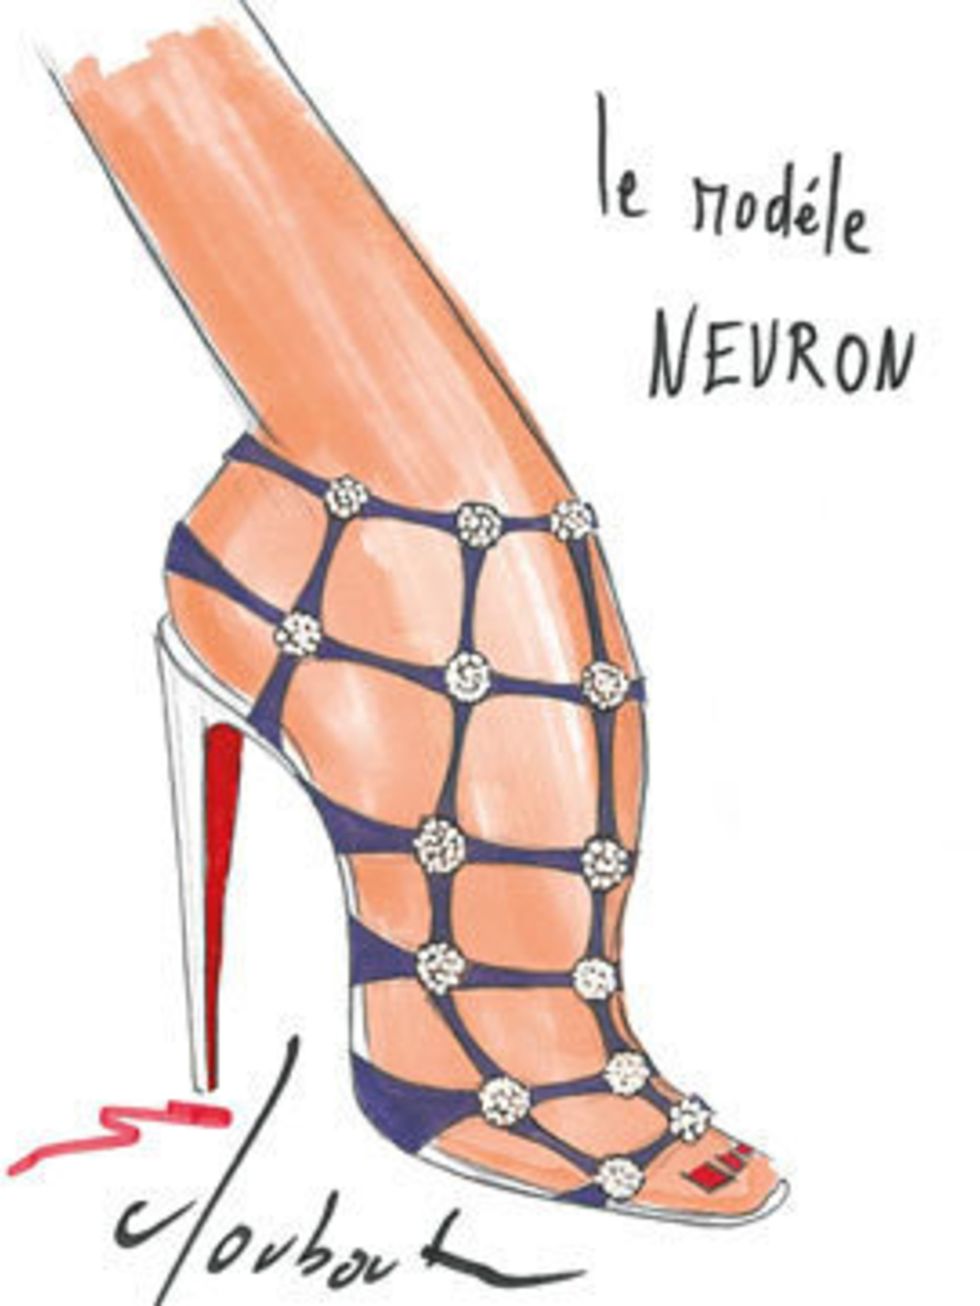 <p>Christian Louboutin's Neuron shoes from the 20th Anniversary Capsule Collection.</p>